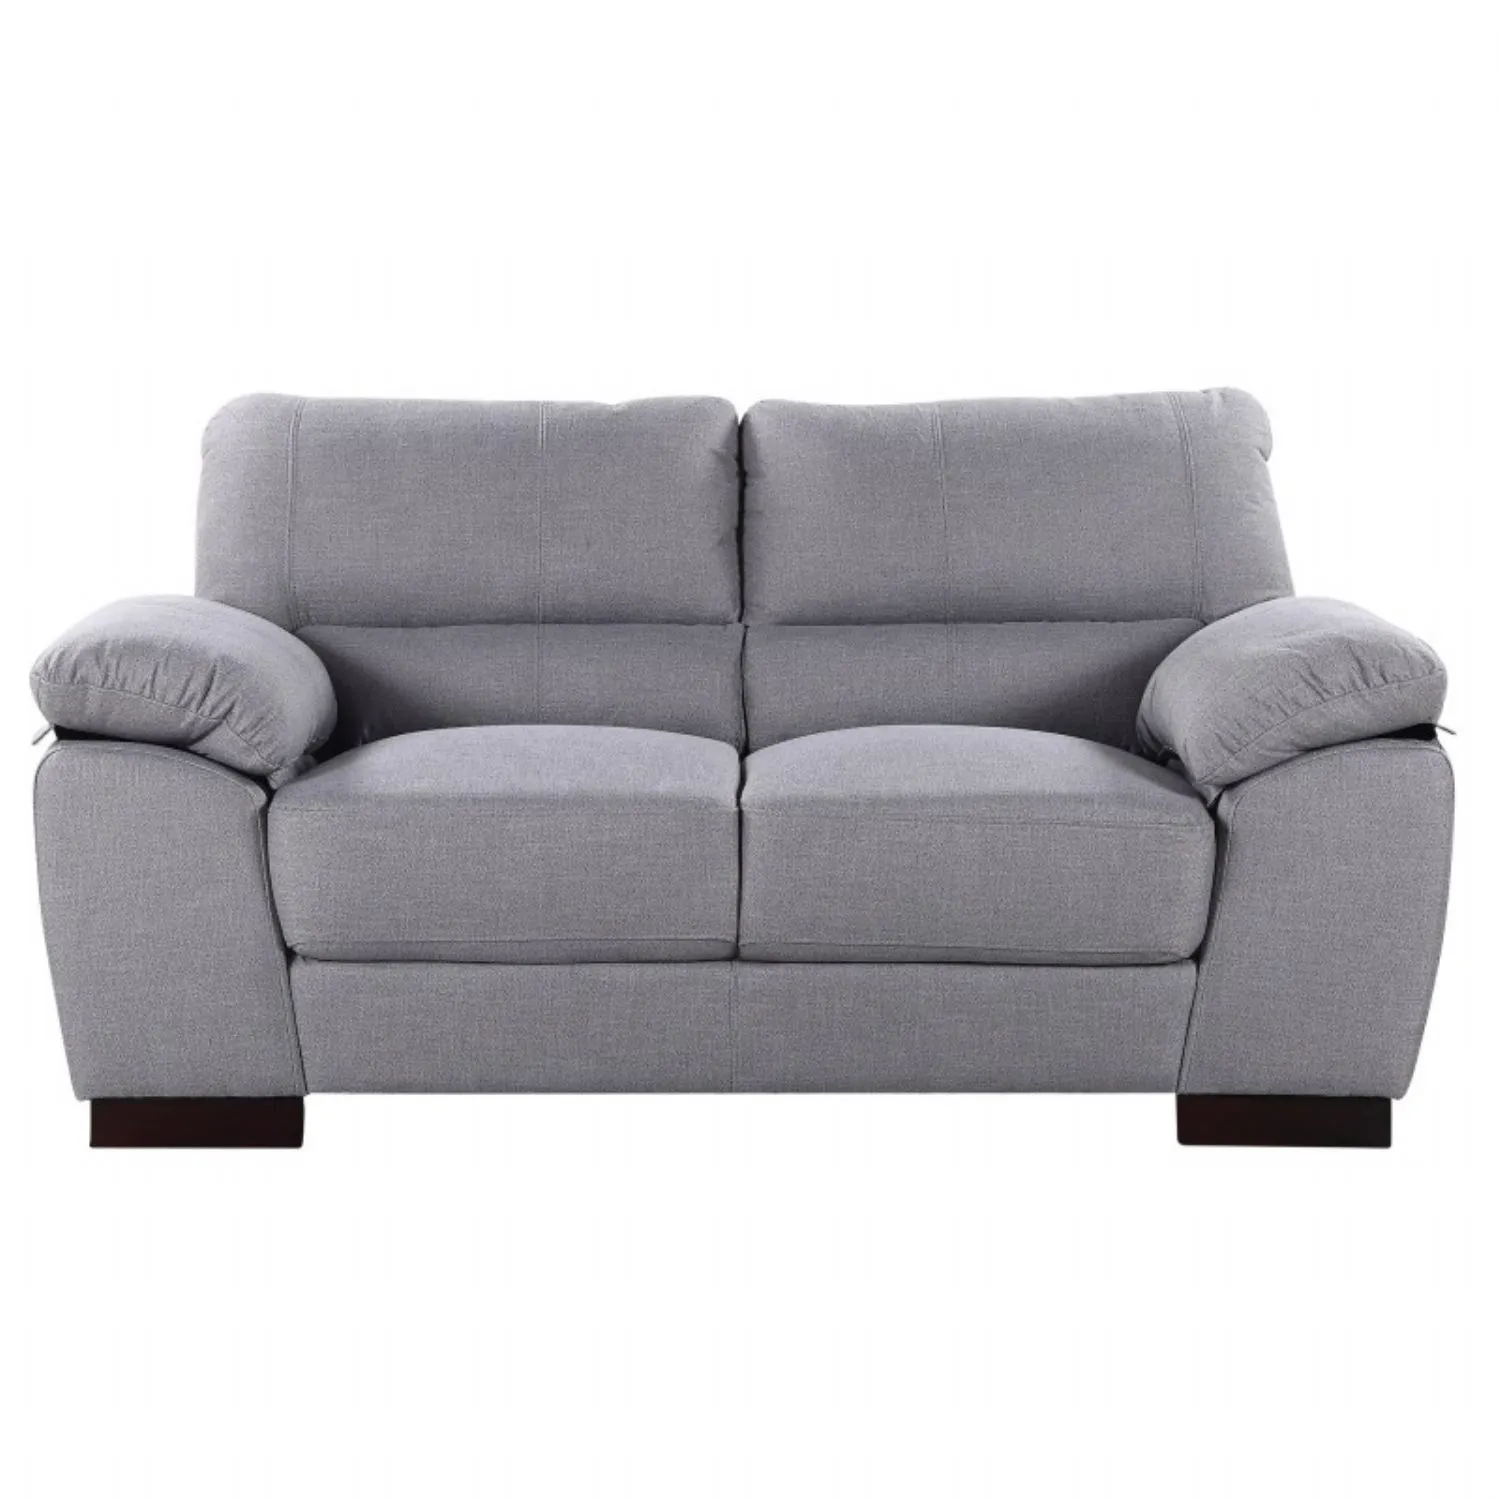 Contract Woven Fabric 2 Seat Sofas